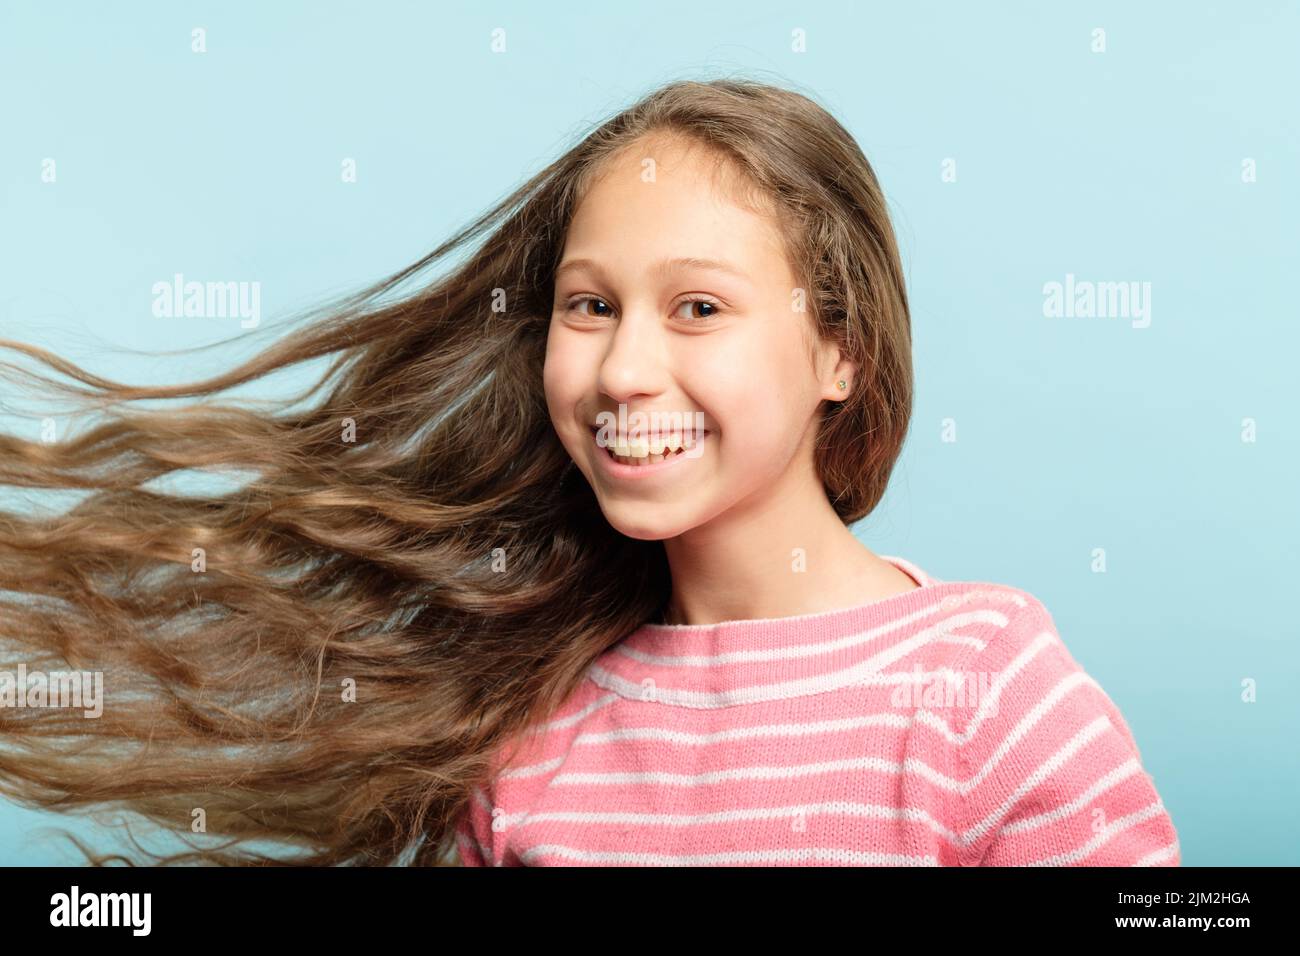 adolescent girl wavy hair flying haircare kids Stock Photo